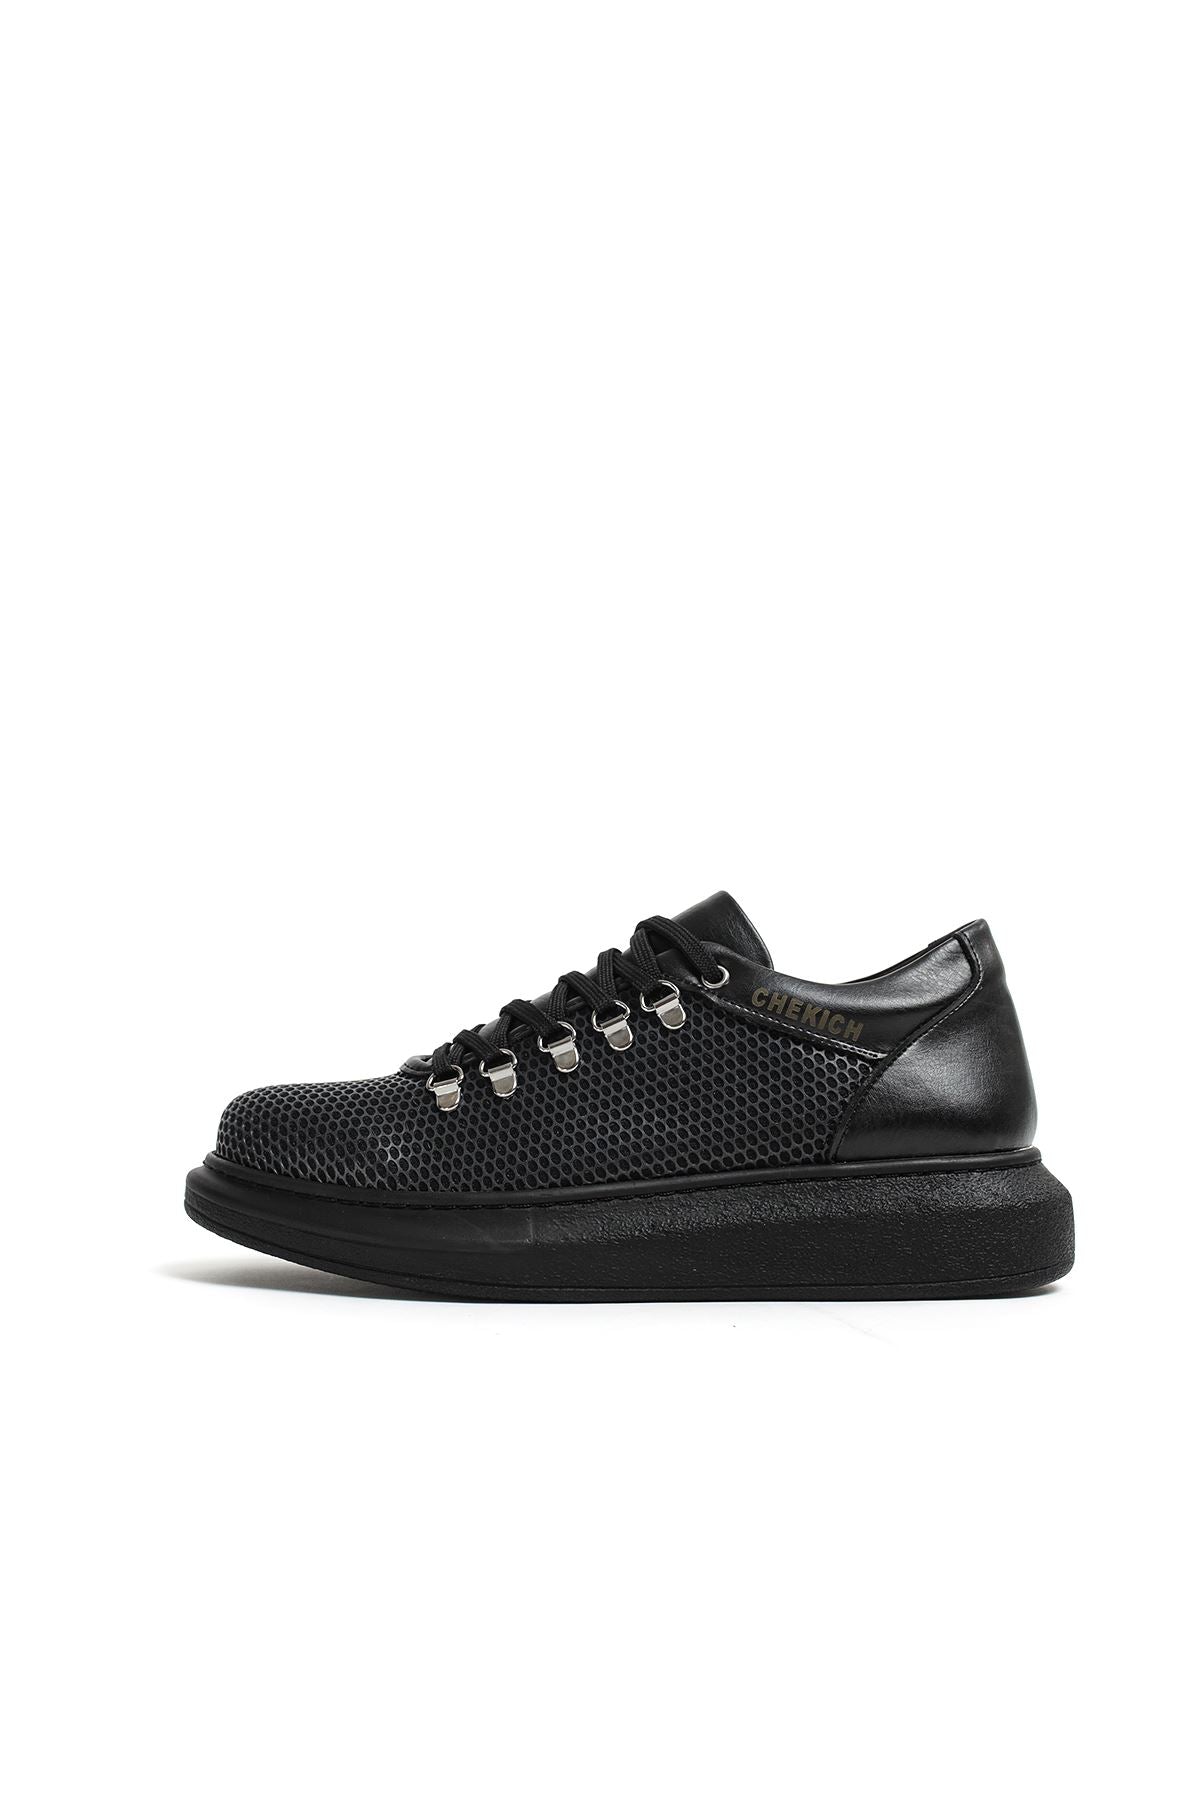 CH021 Men's Unisex Full black Honeycomb Processing Casual Sneaker Sports Shoes - STREETMODE ™